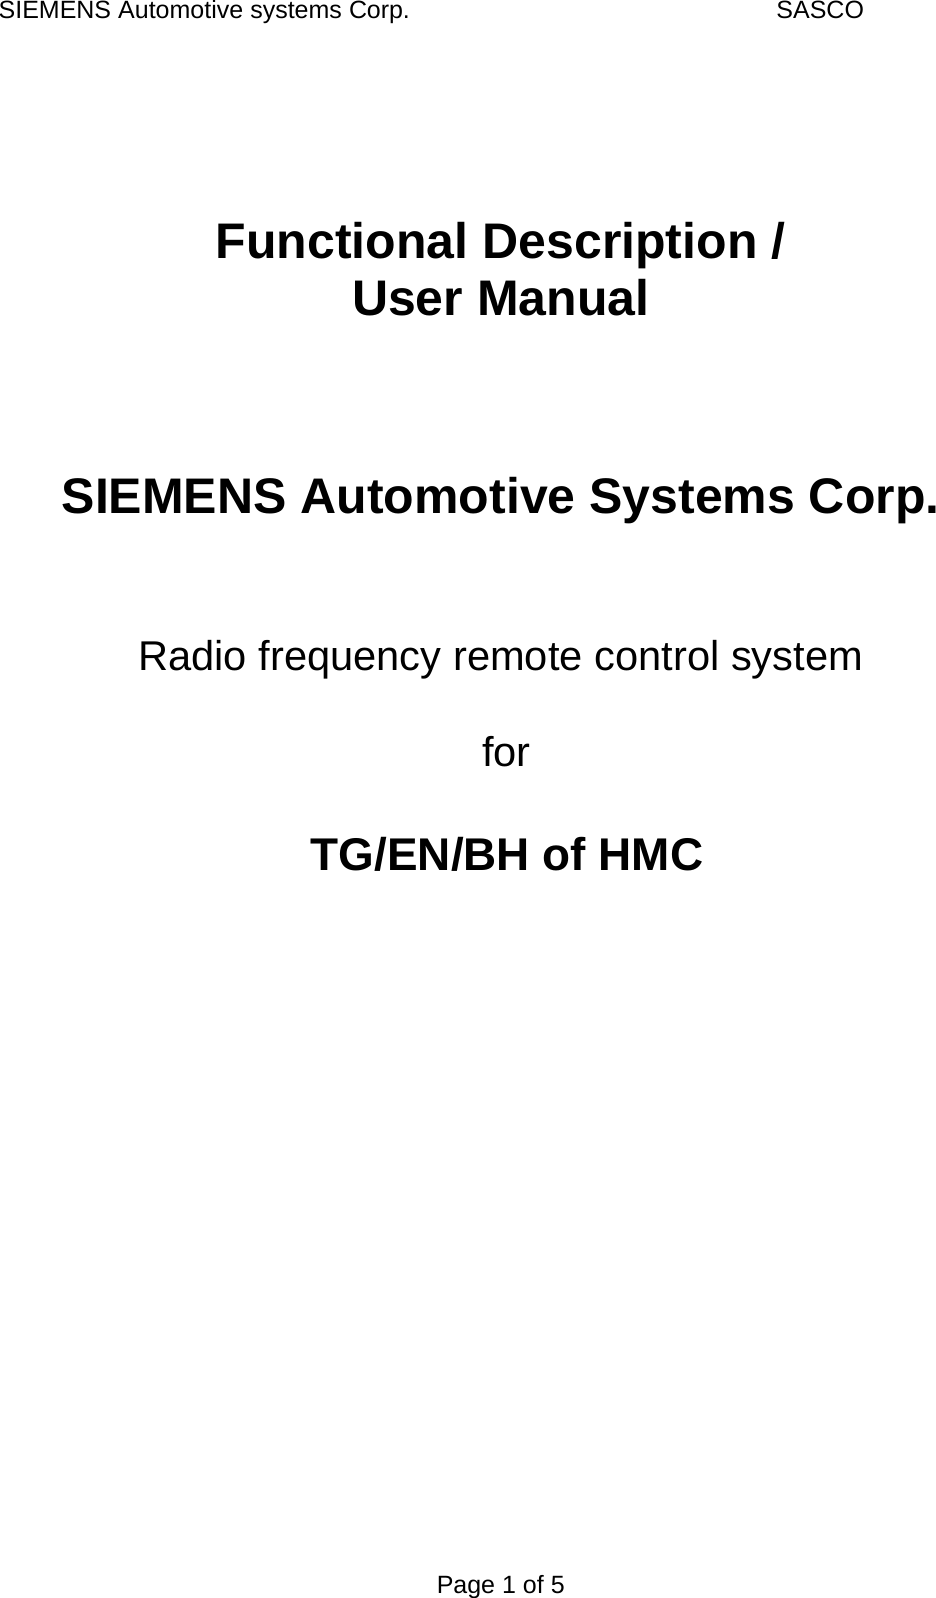 SIEMENS Automotive systems Corp.    SASCO Page 1 of 5    Functional Description / User Manual    SIEMENS Automotive Systems Corp.   Radio frequency remote control system   for   TG/EN/BH of HMC 